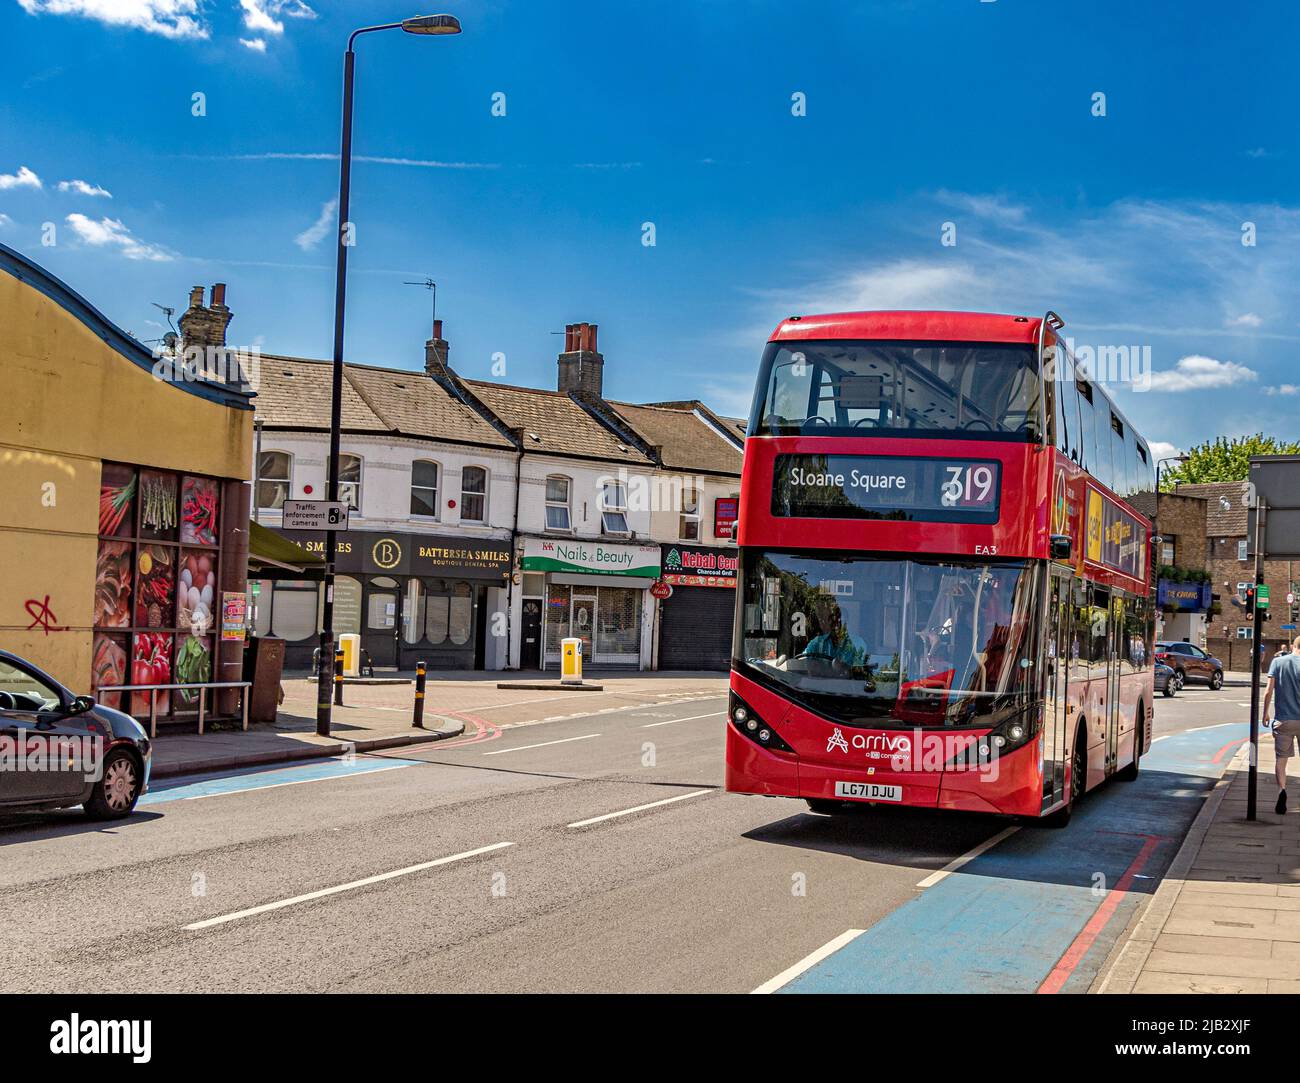 A route 319 Electric London bus on route to Sloane Square, makes it's way along Battersea Park Road in SW London ,UK Stock Photo